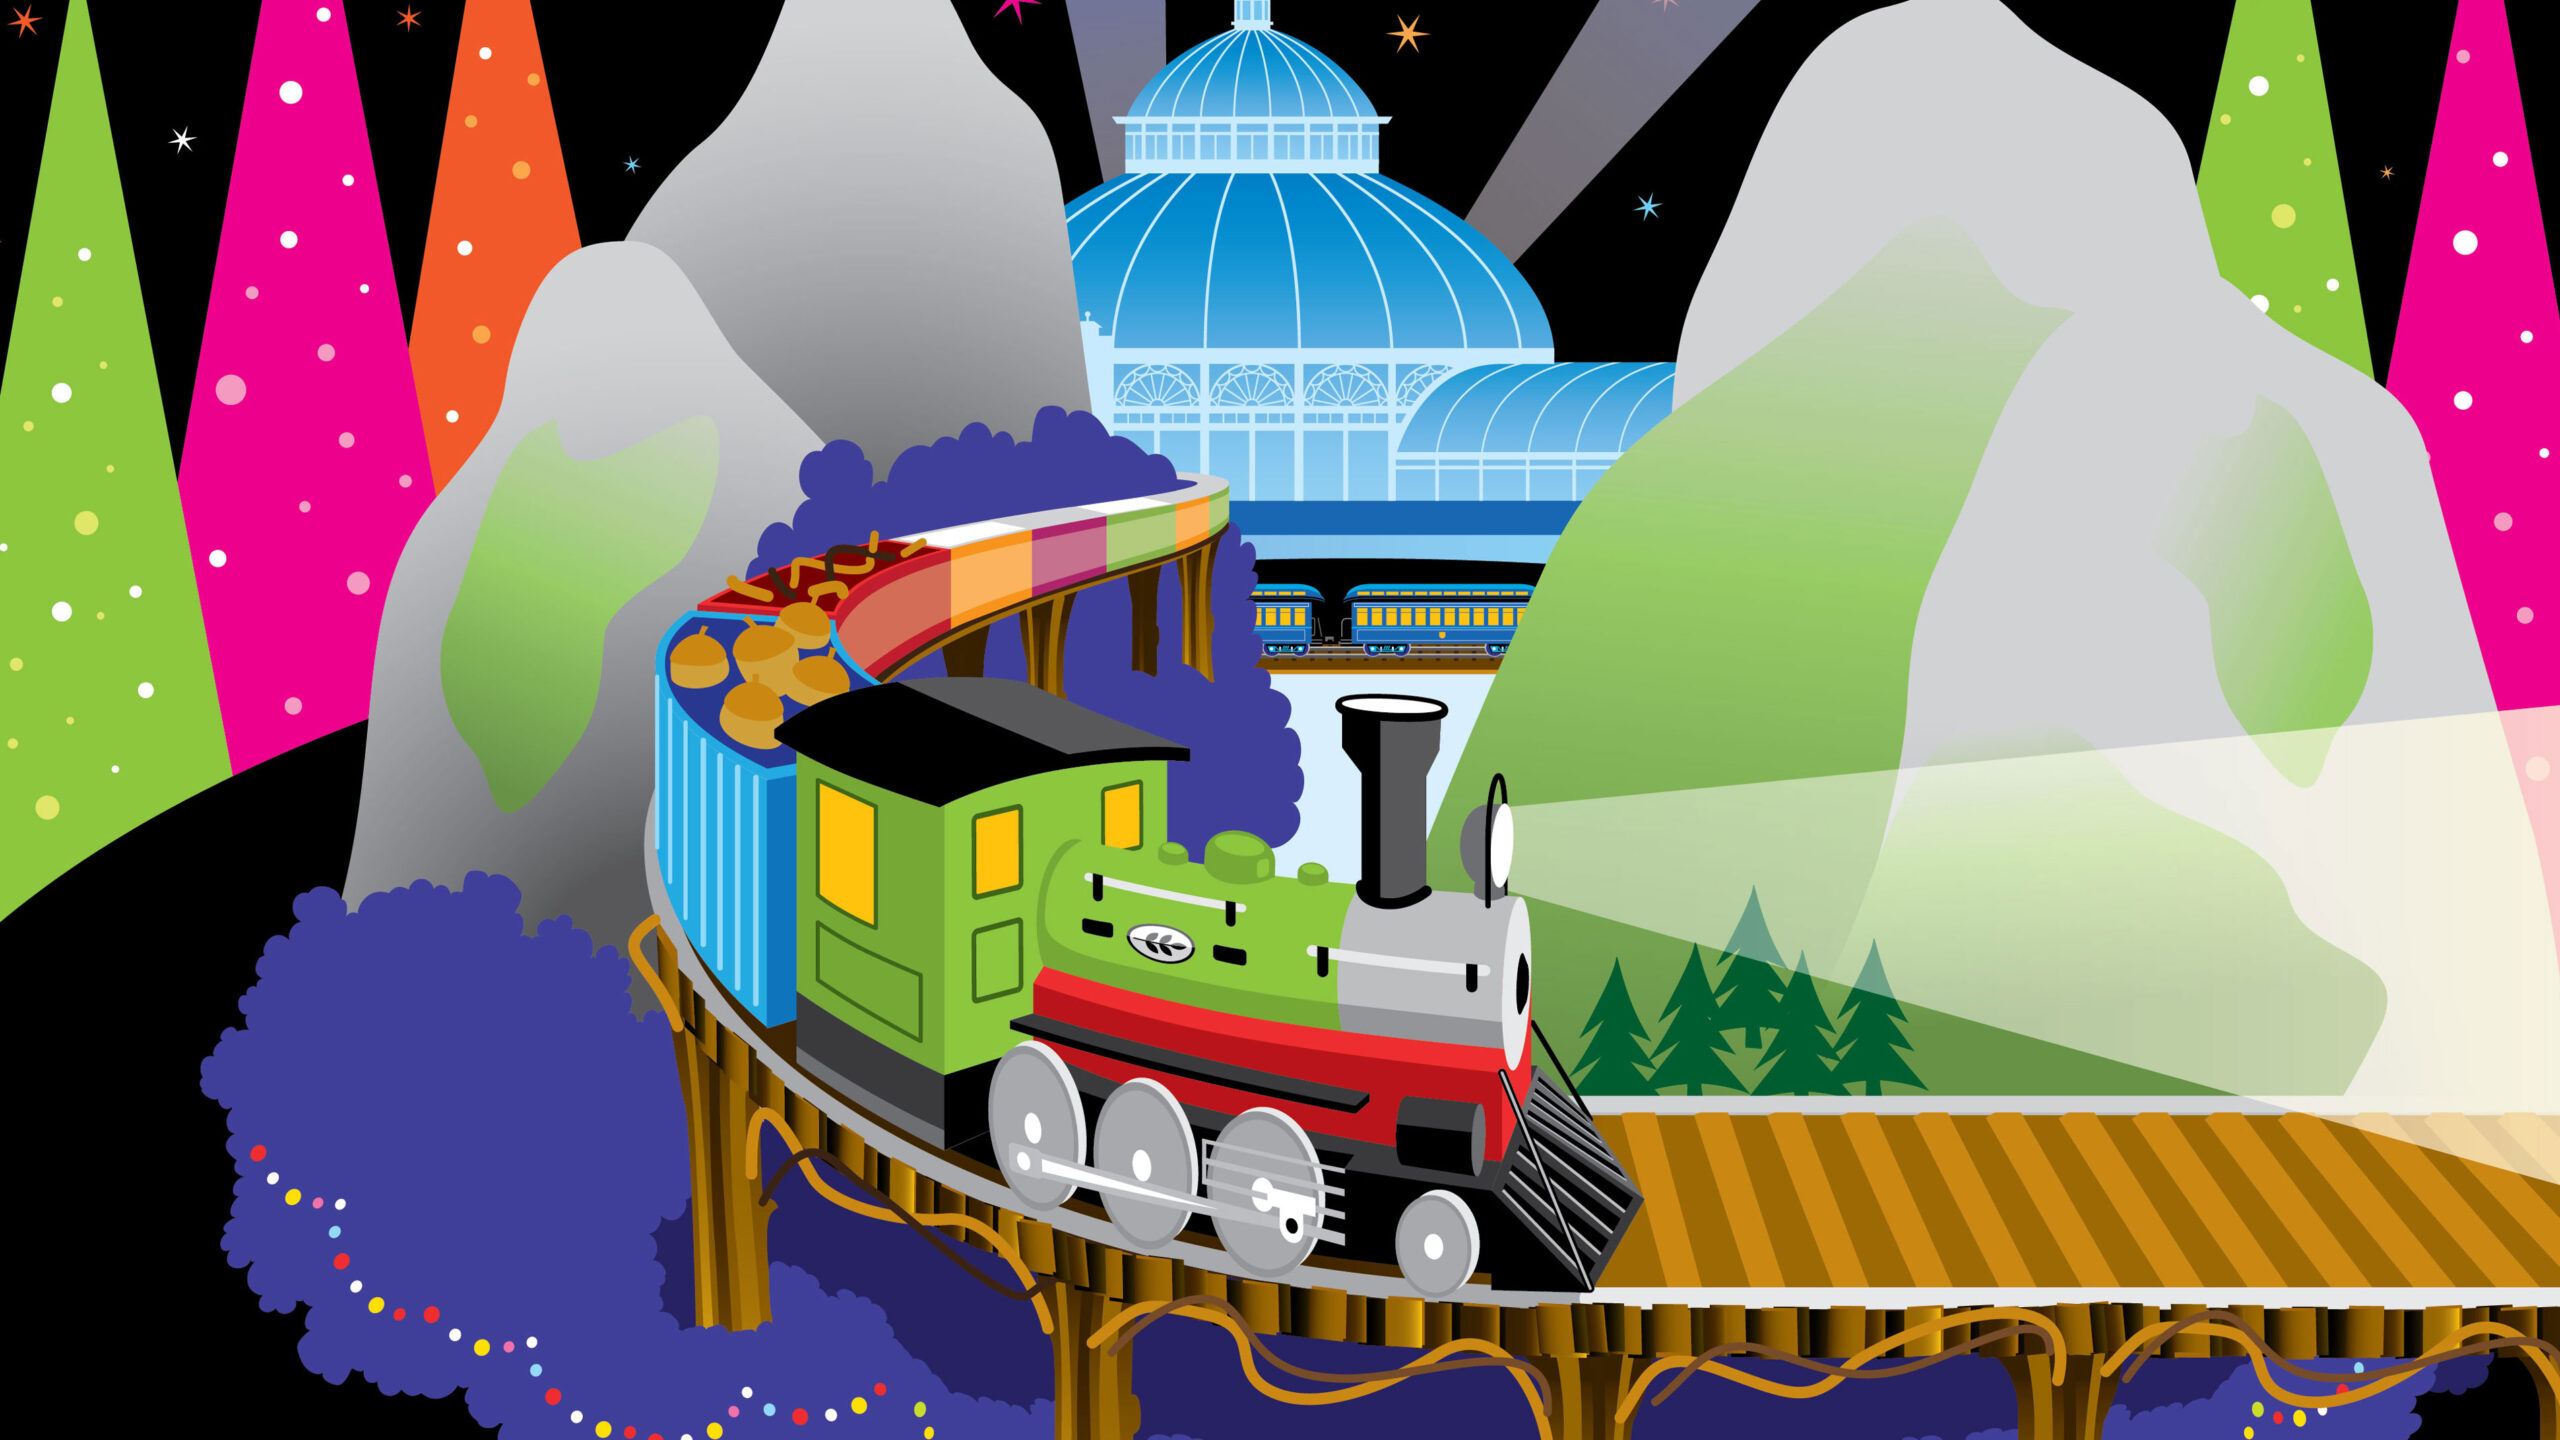 A colorful illustration of a steam locomotive traveling on a railway through mountains